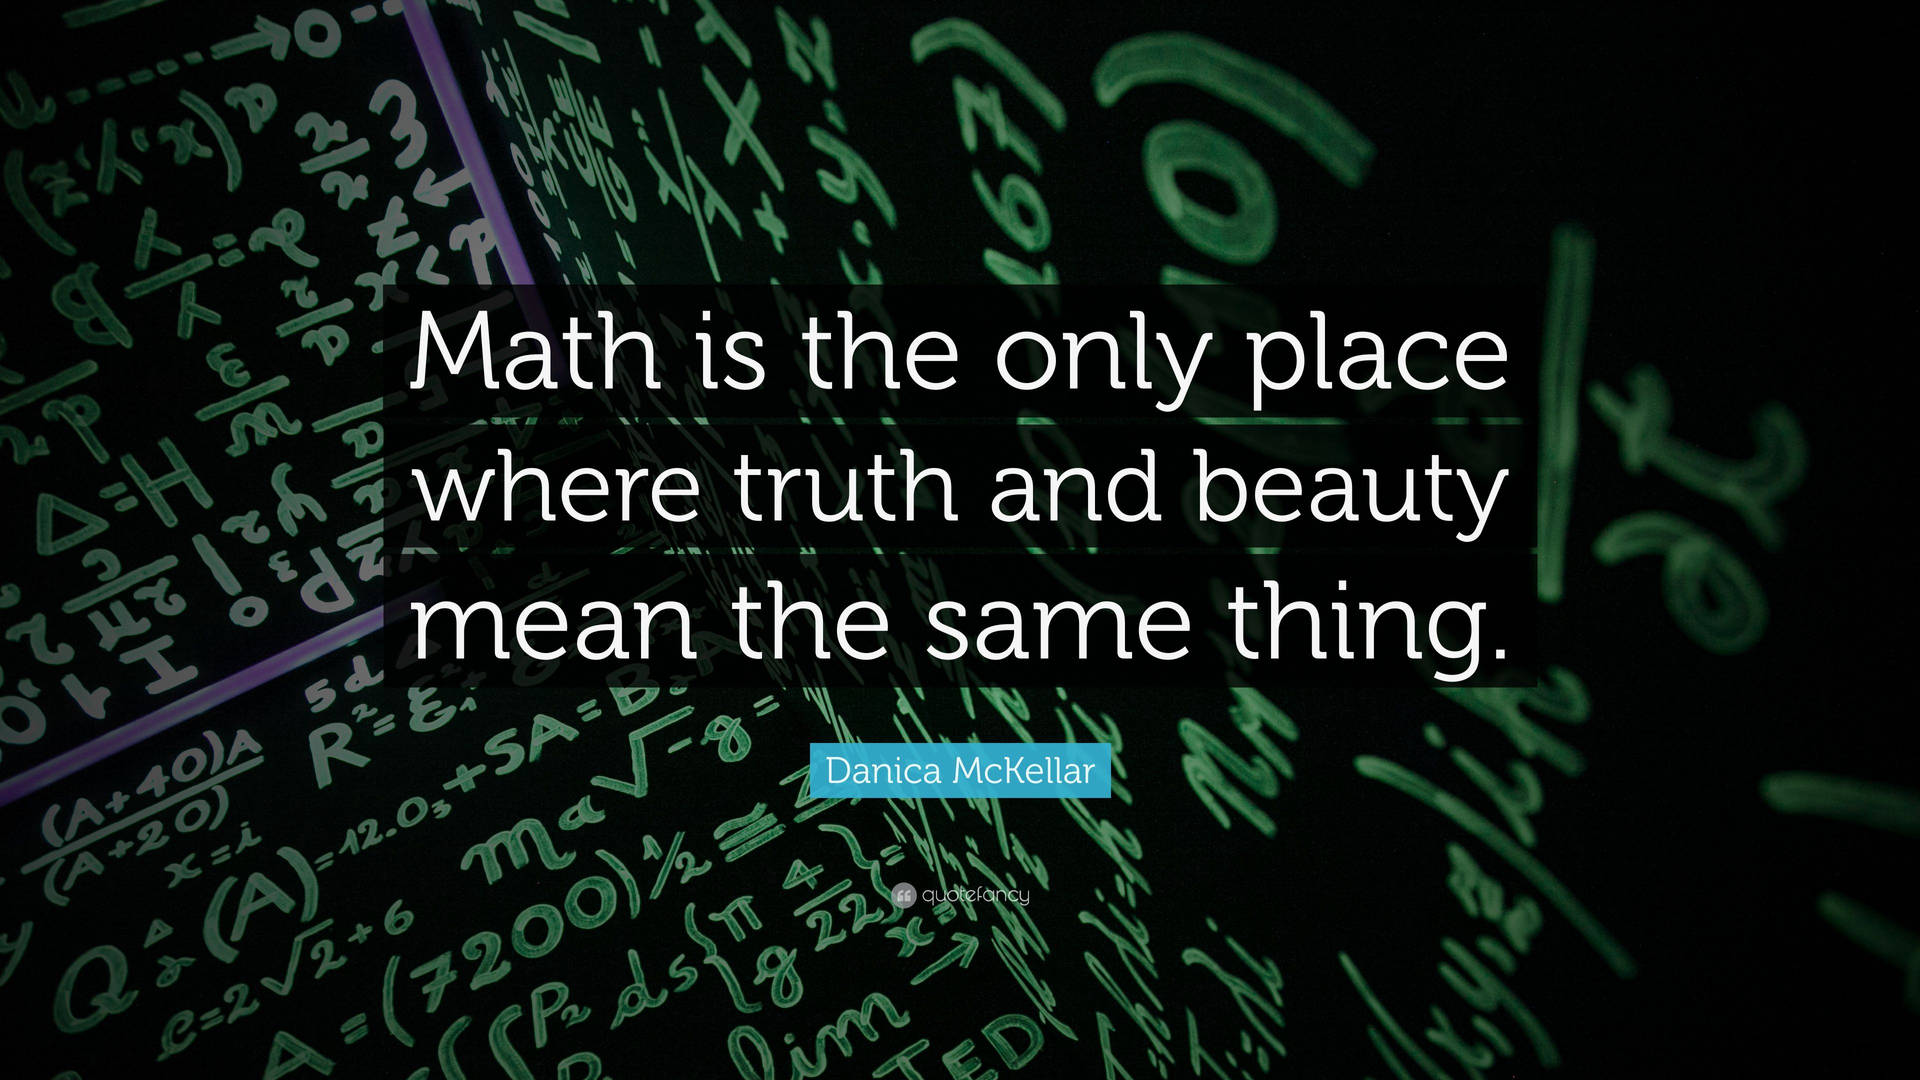 Math 3840X2160 Wallpaper and Background Image